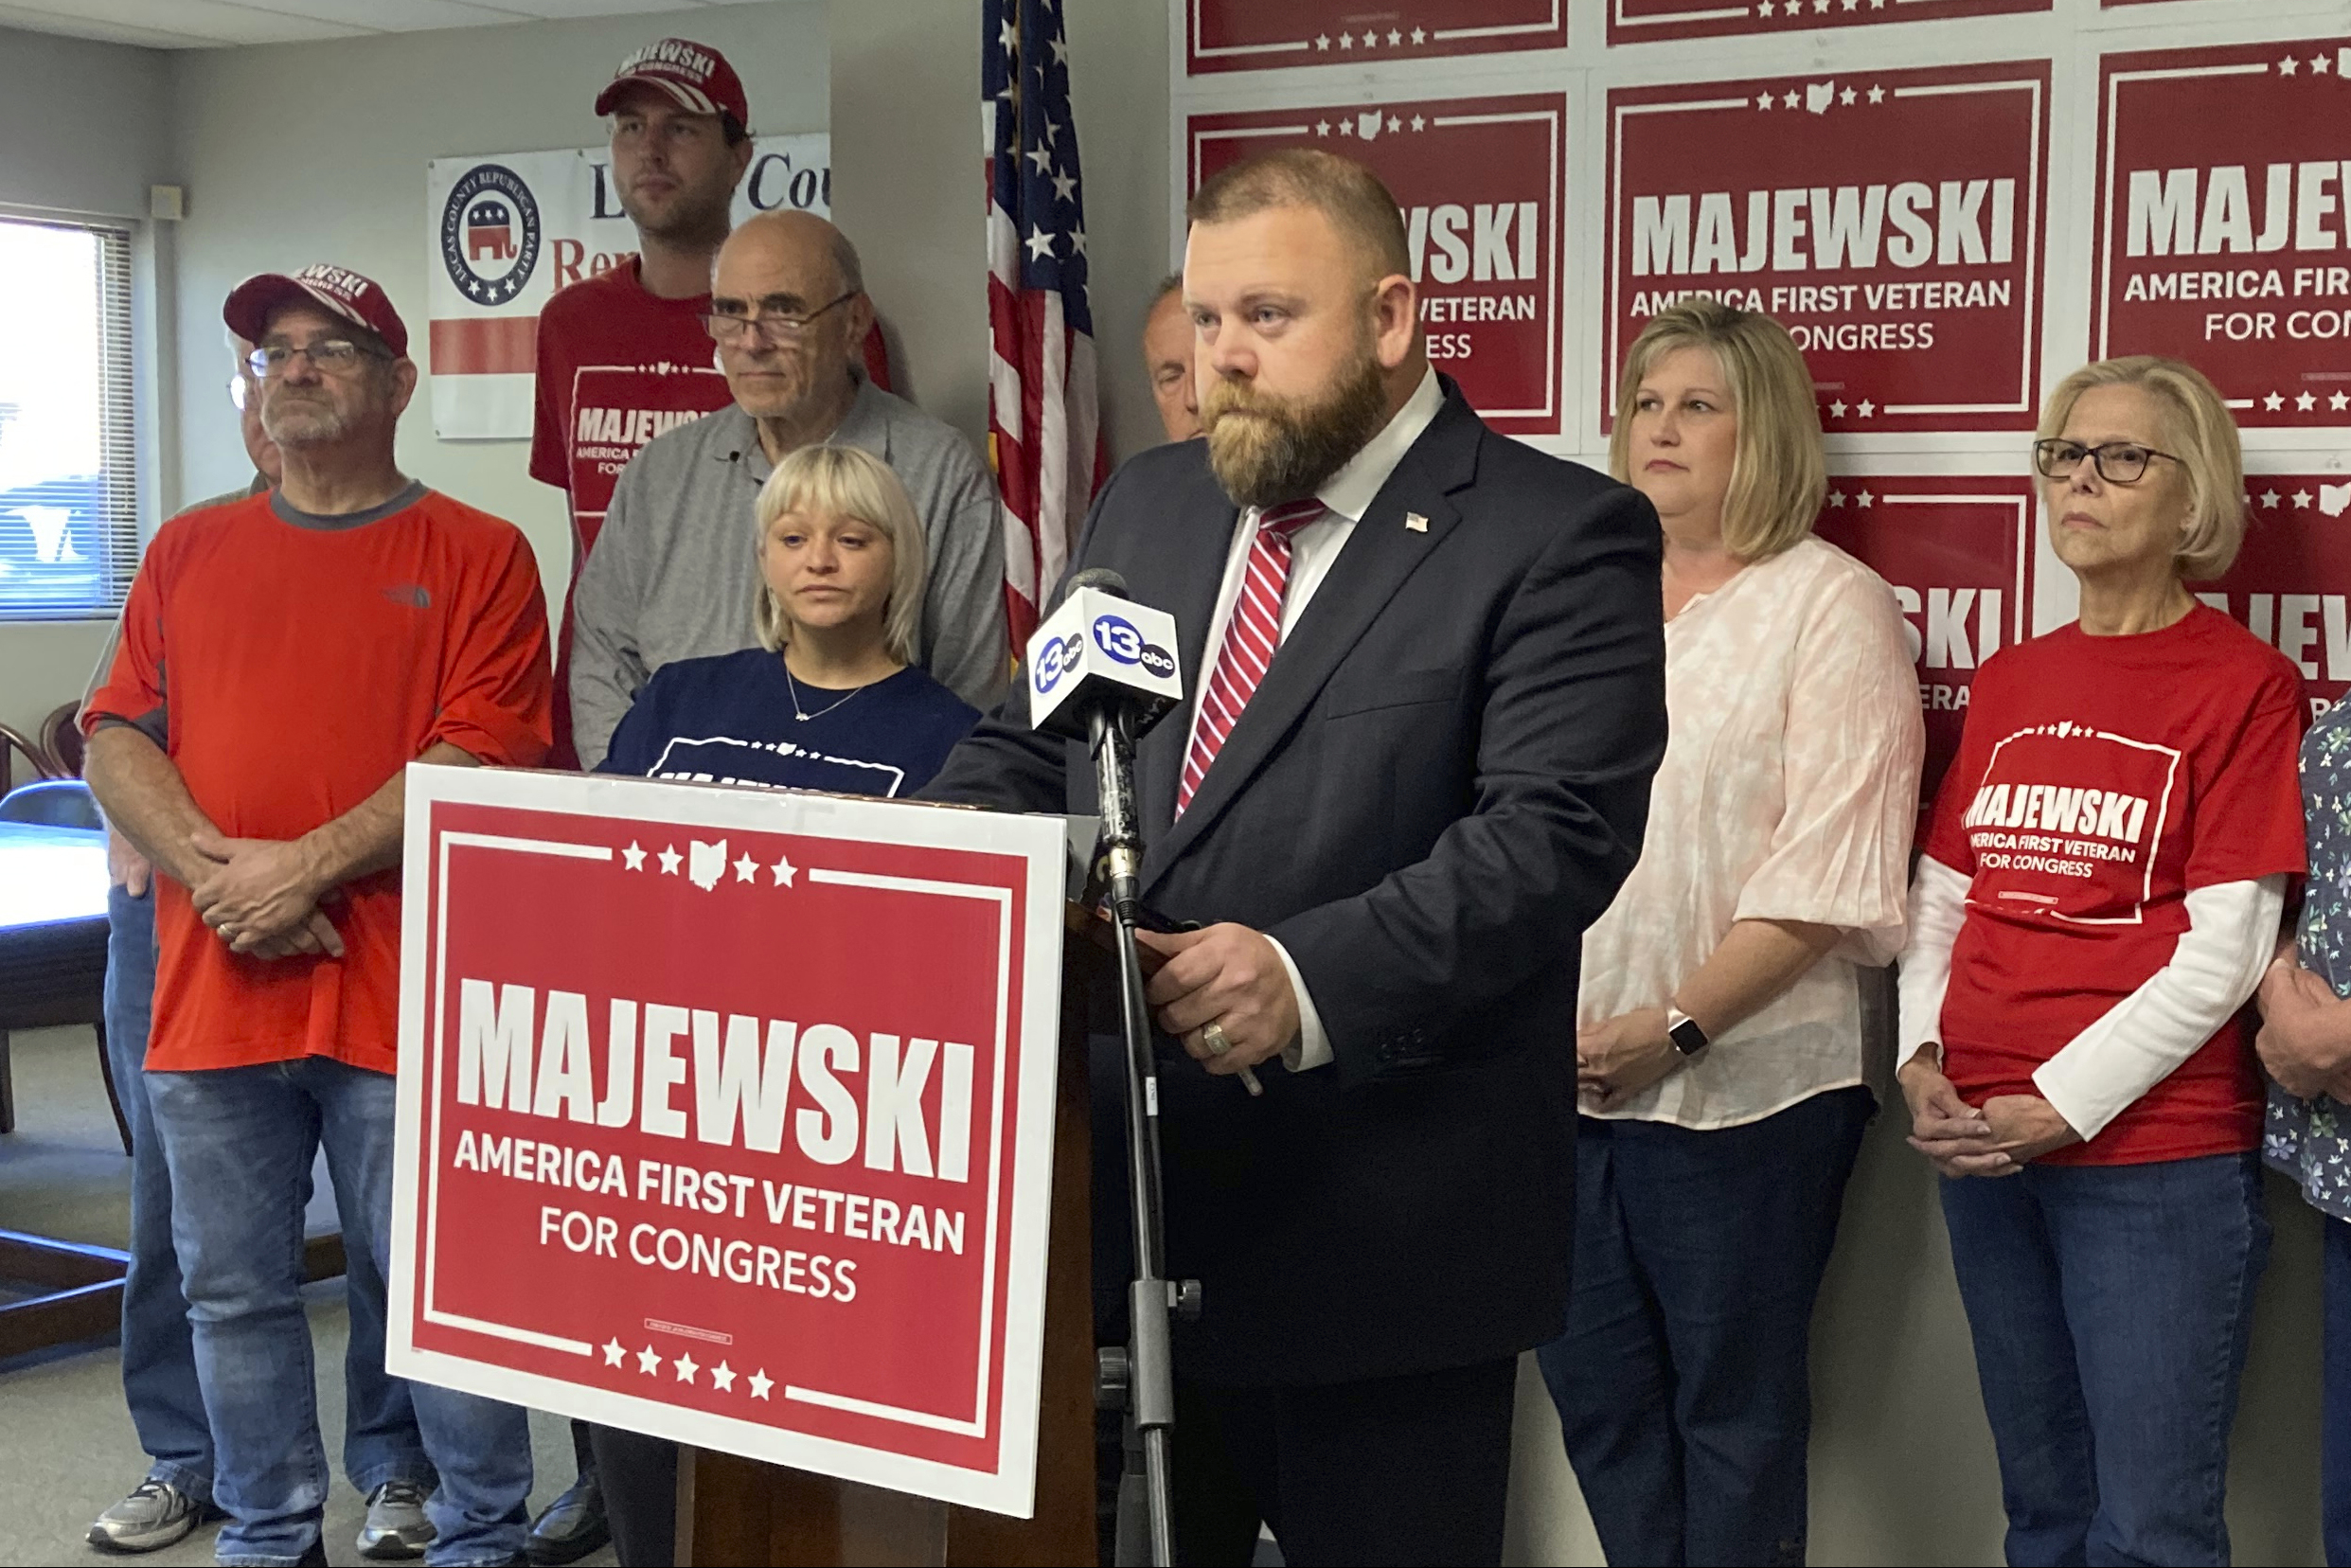 PHOTO: Ohio Republican congressional candidate J.R. Majewski defends his military record at a news conference on Sept. 23, 2022, in Holland, Ohio.